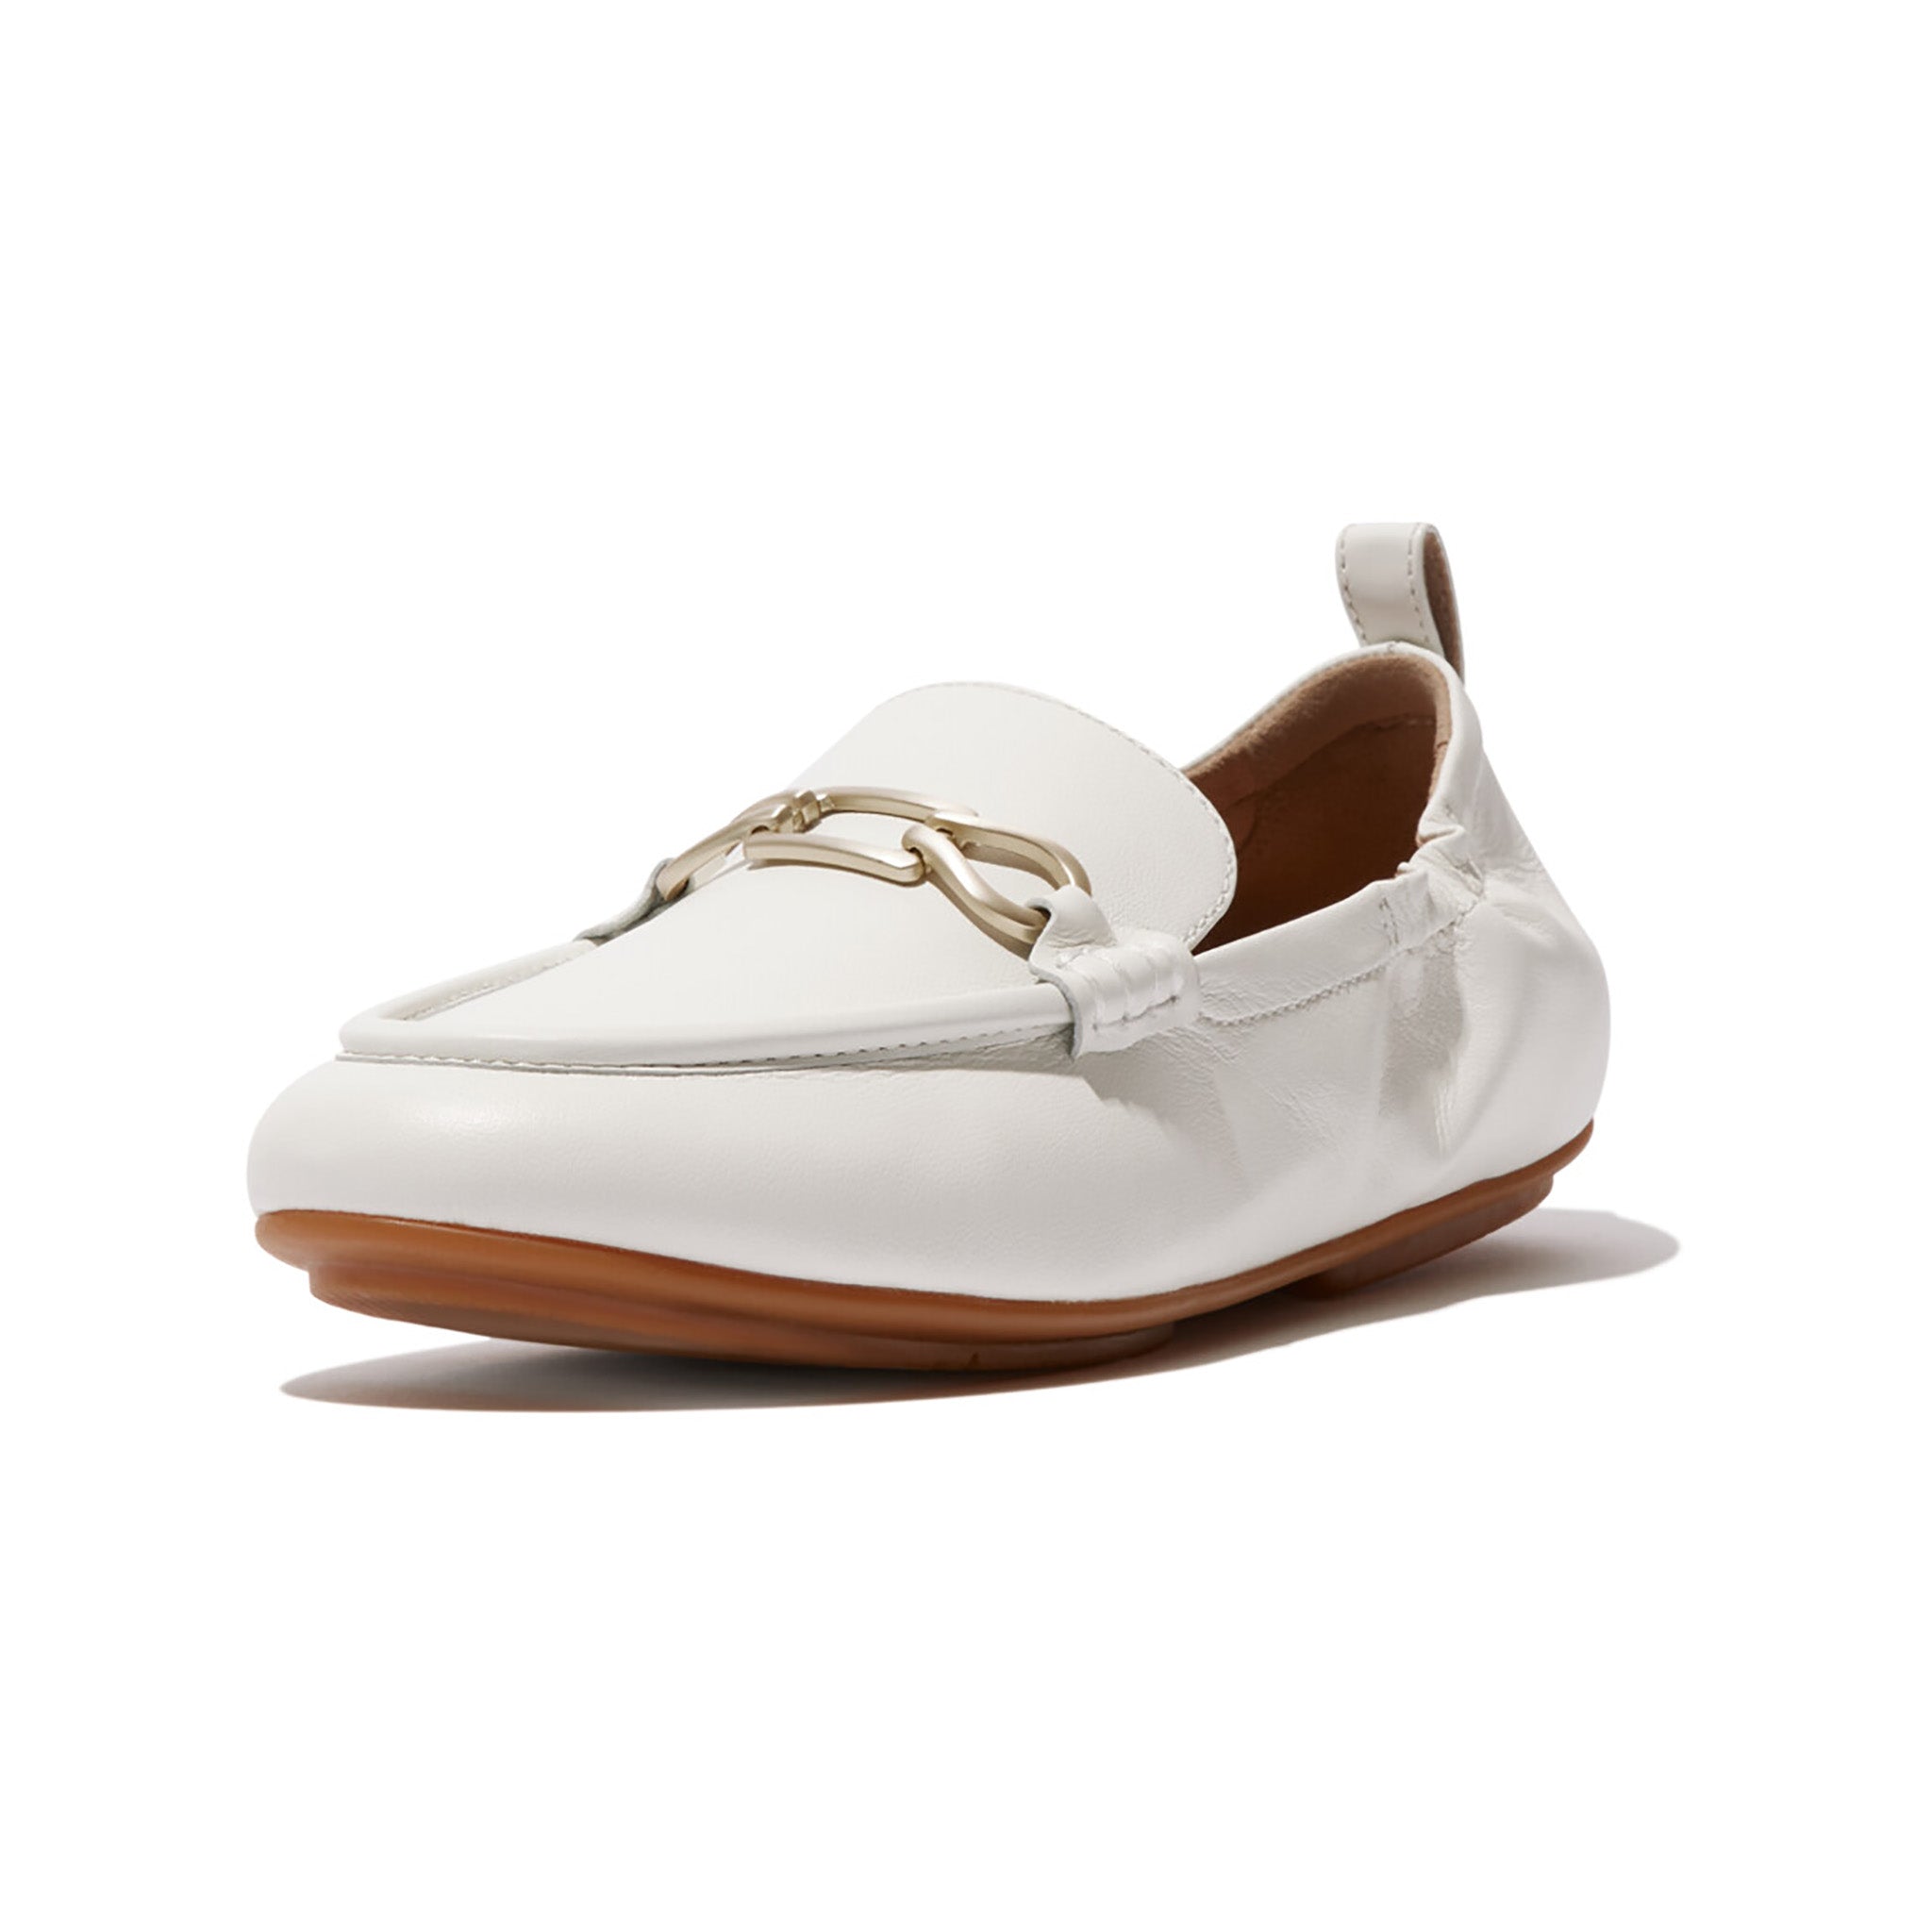 FitFlop Allegro Crush-Back Loafer